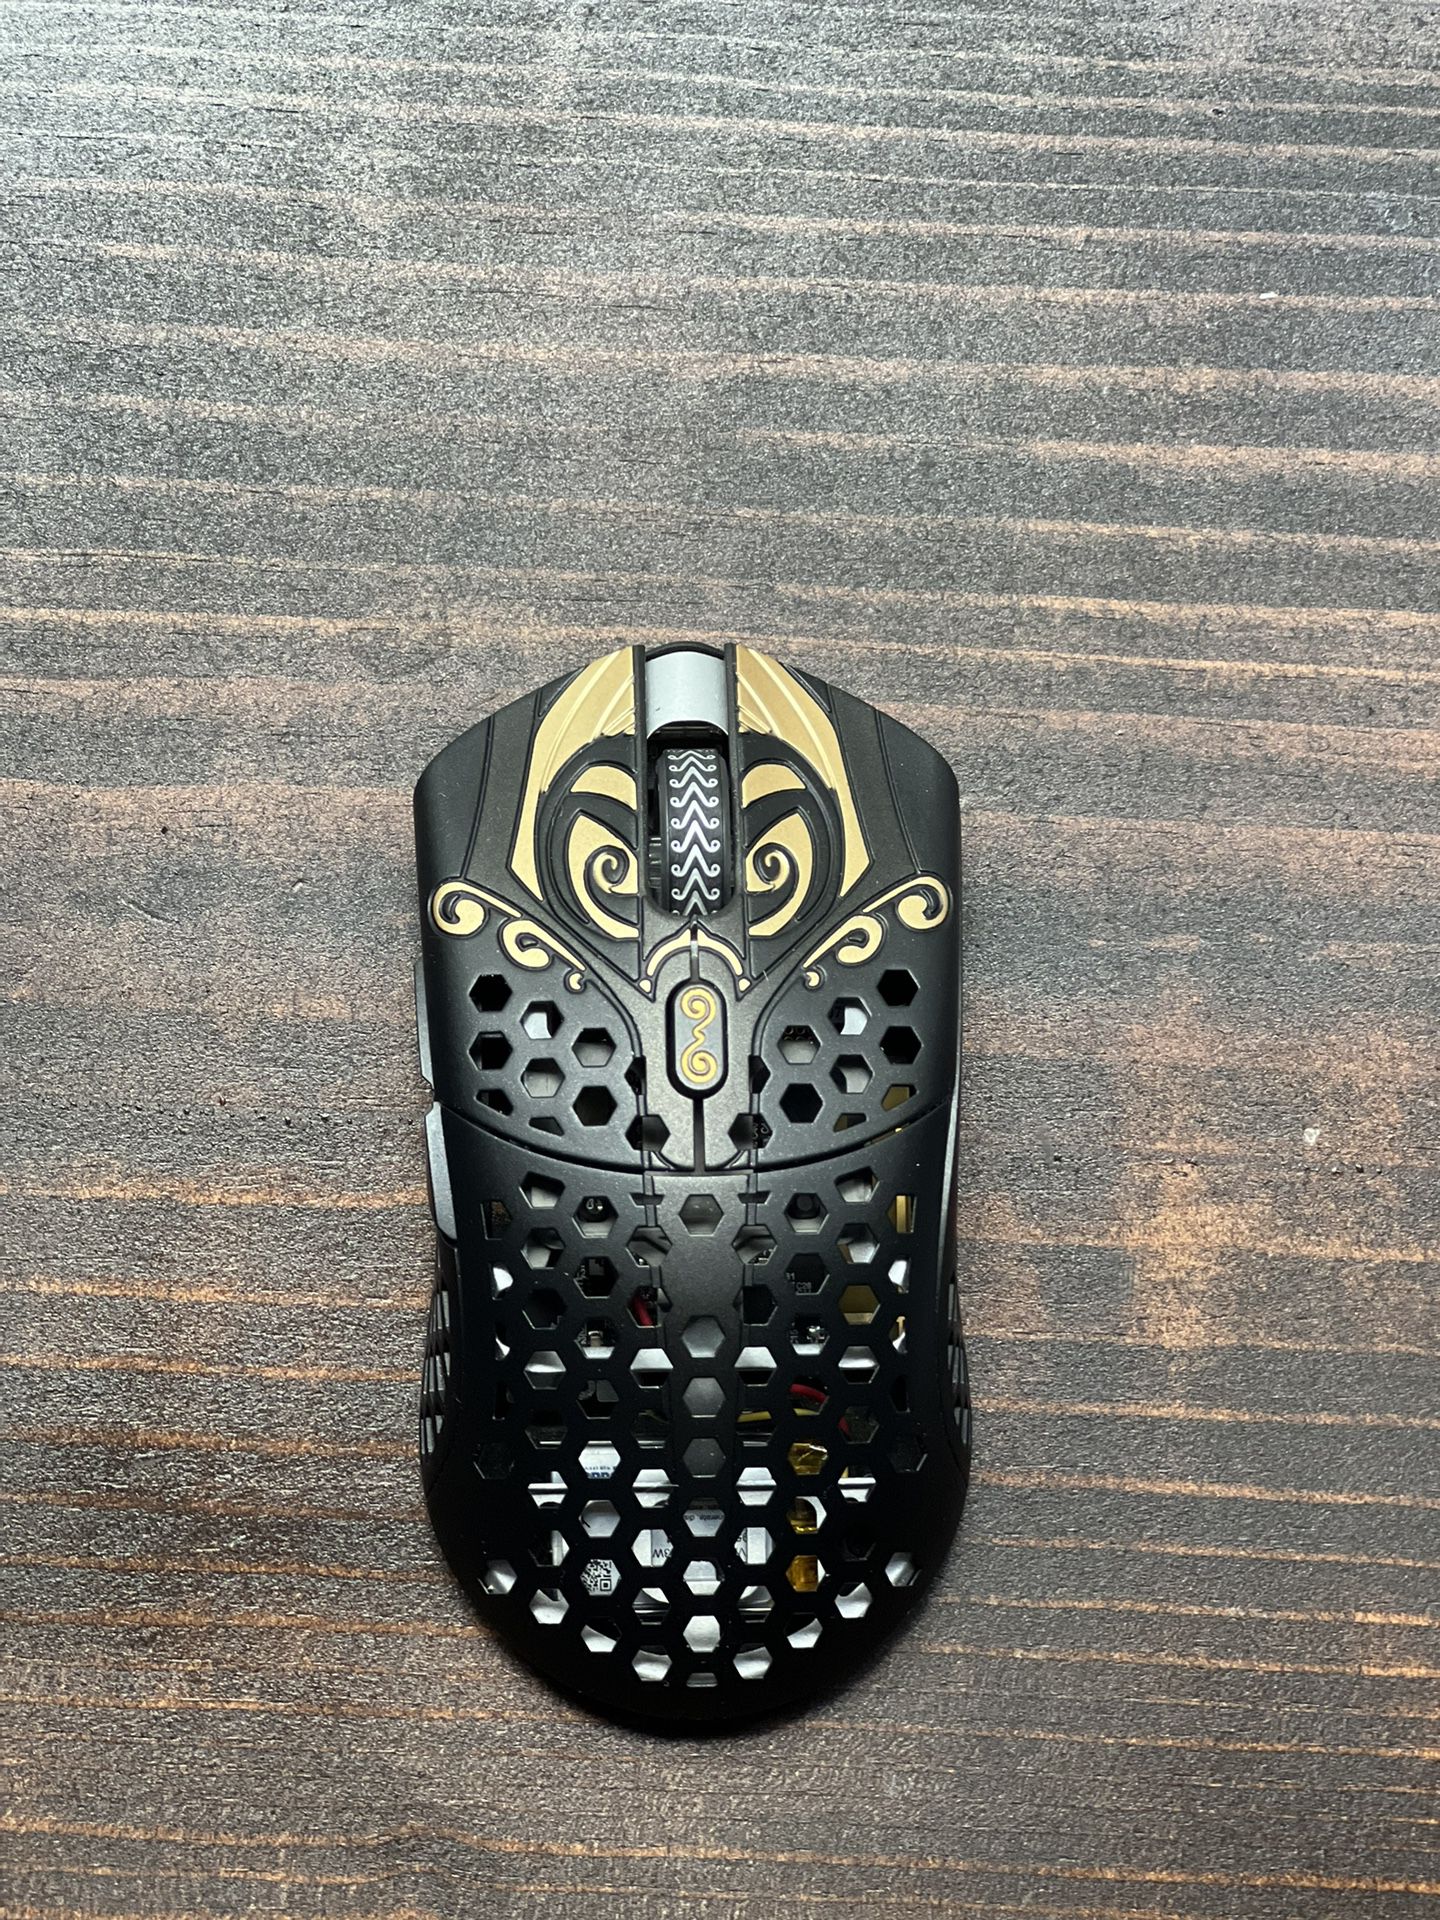 Finalmouse Starlight 12 Hades for Sale in Gurley, AL - OfferUp